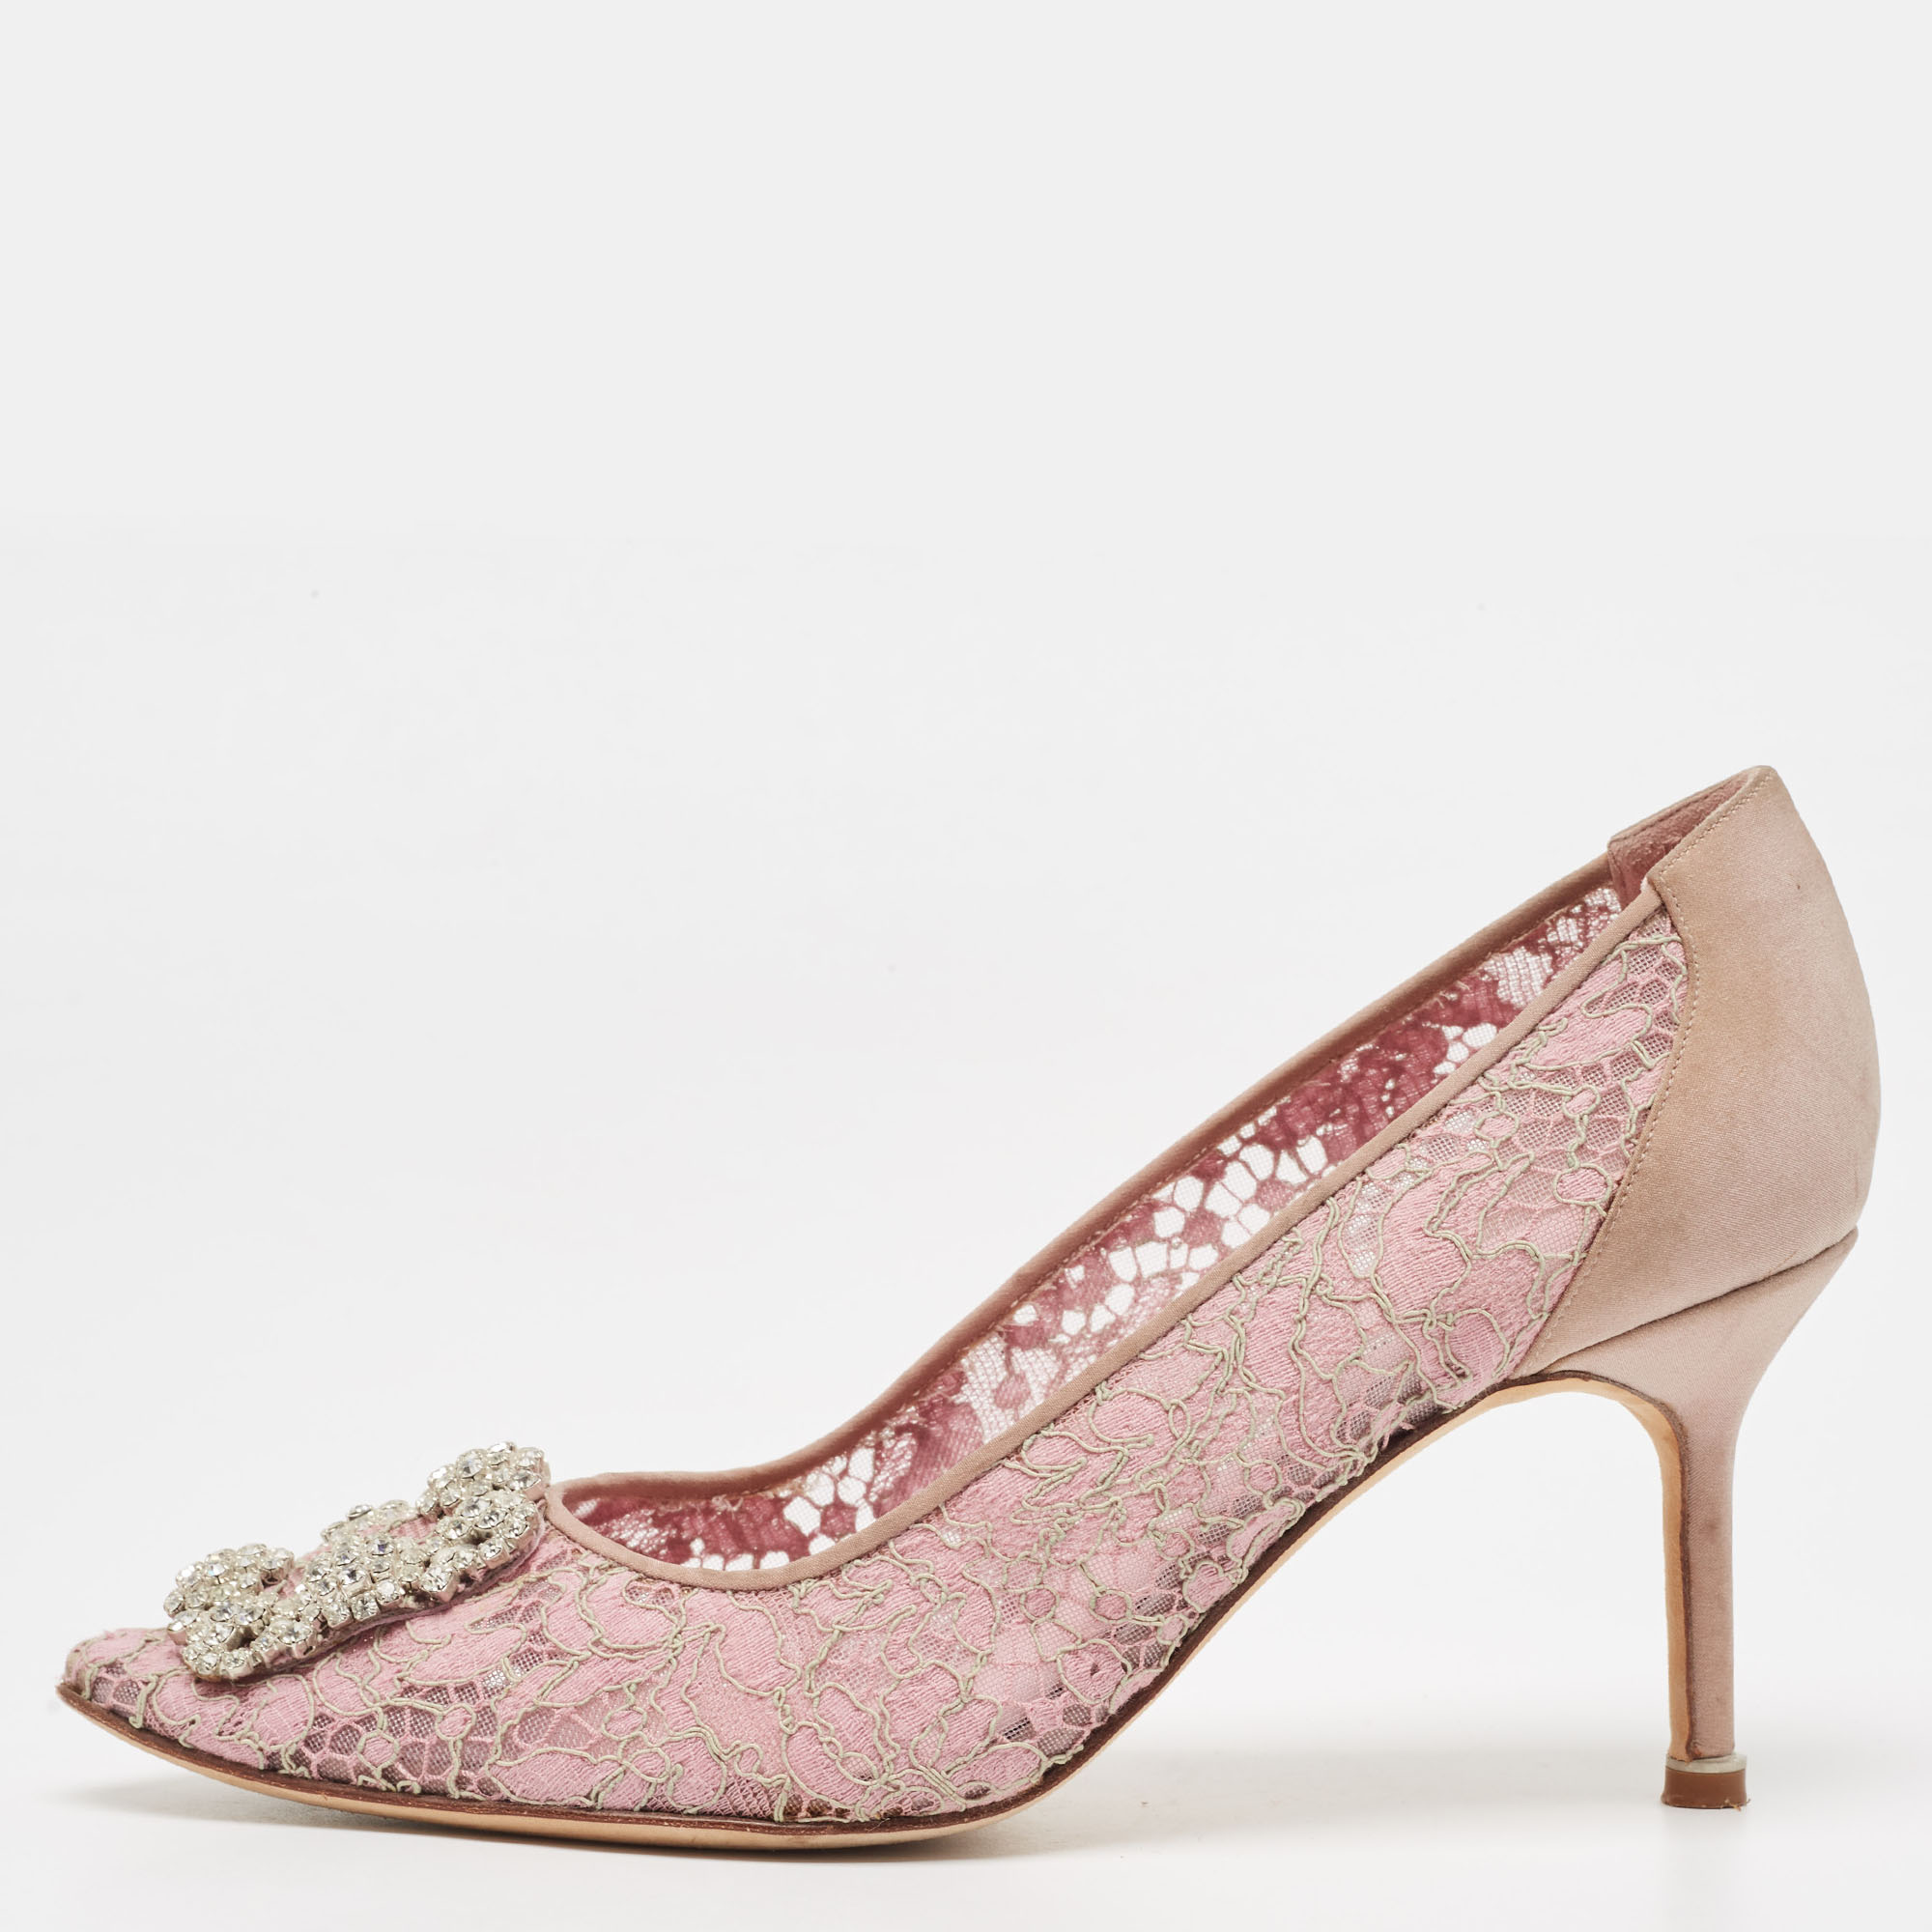 Manolo blahnik pink lace and mesh hangisi pumps size 38.5